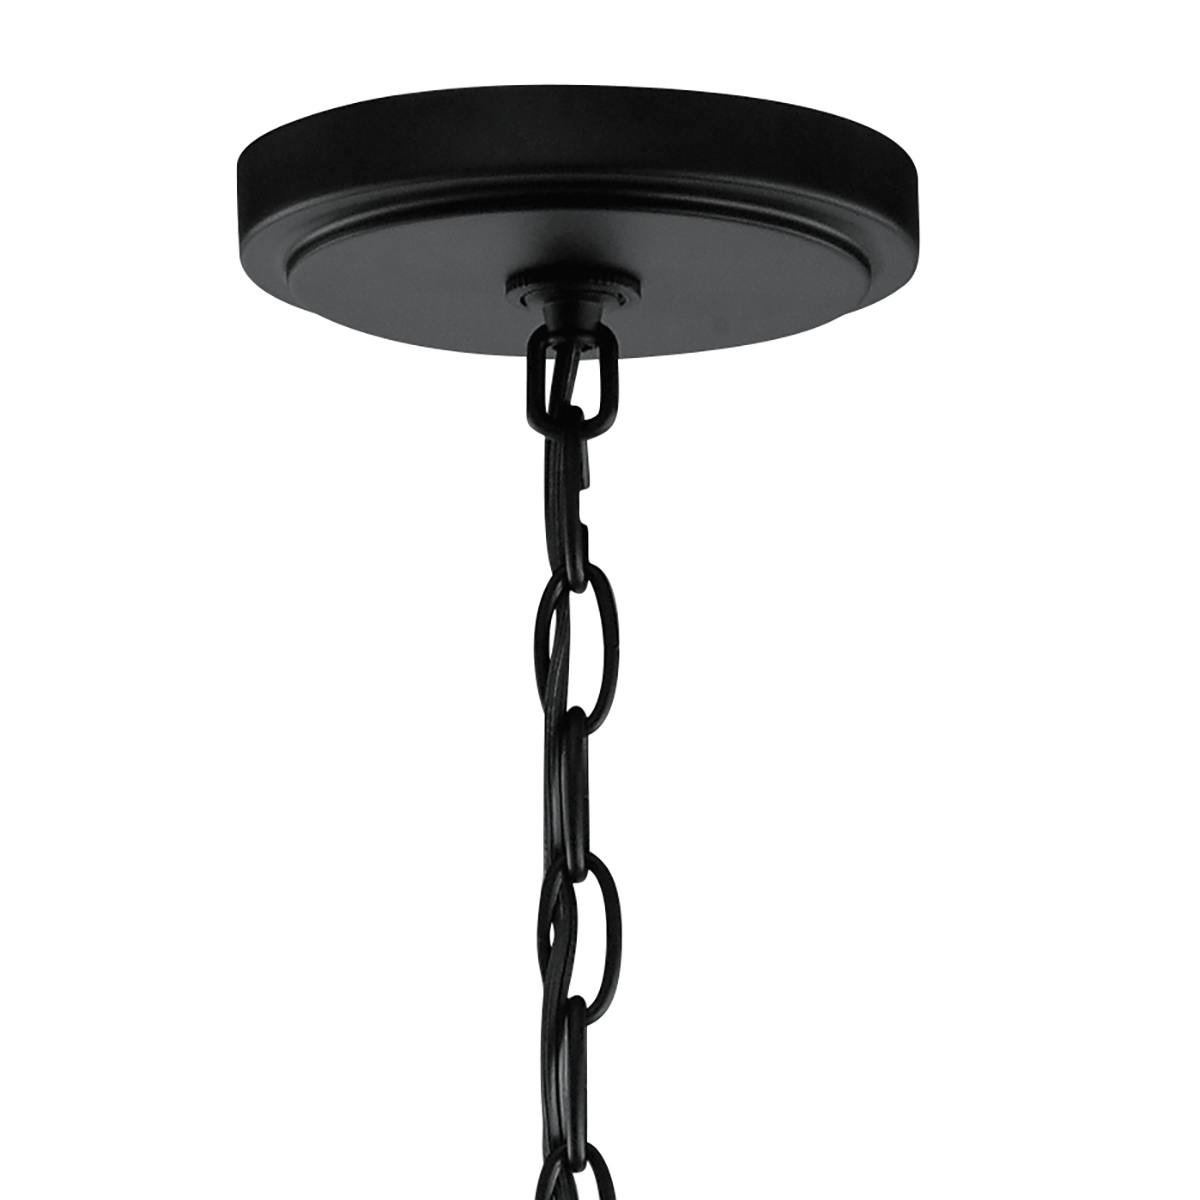 Canopy for the Voleta 27.75" 6 Light Chandelier Black on a white background